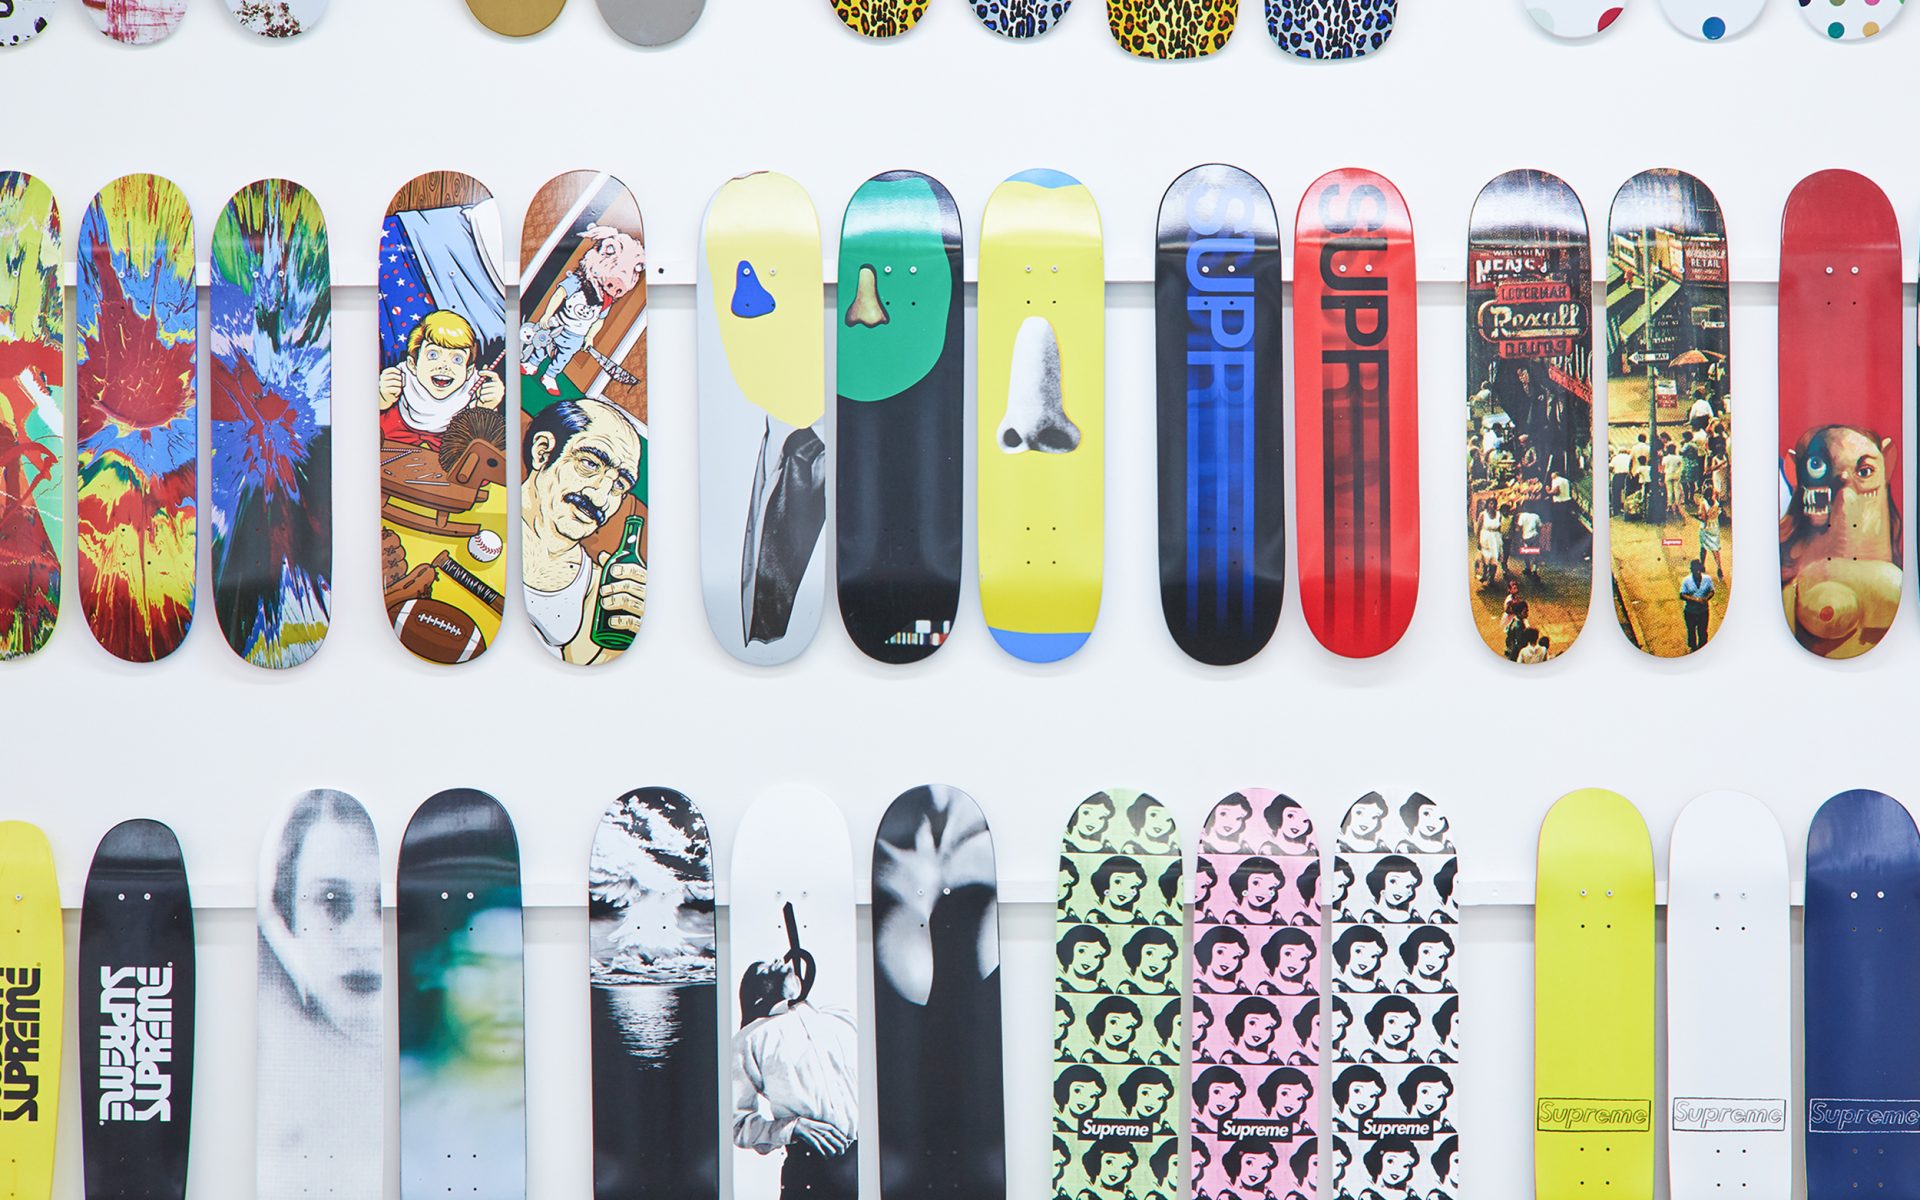 The Only Complete Archive of Supreme Skate Decks Comes to Auction 